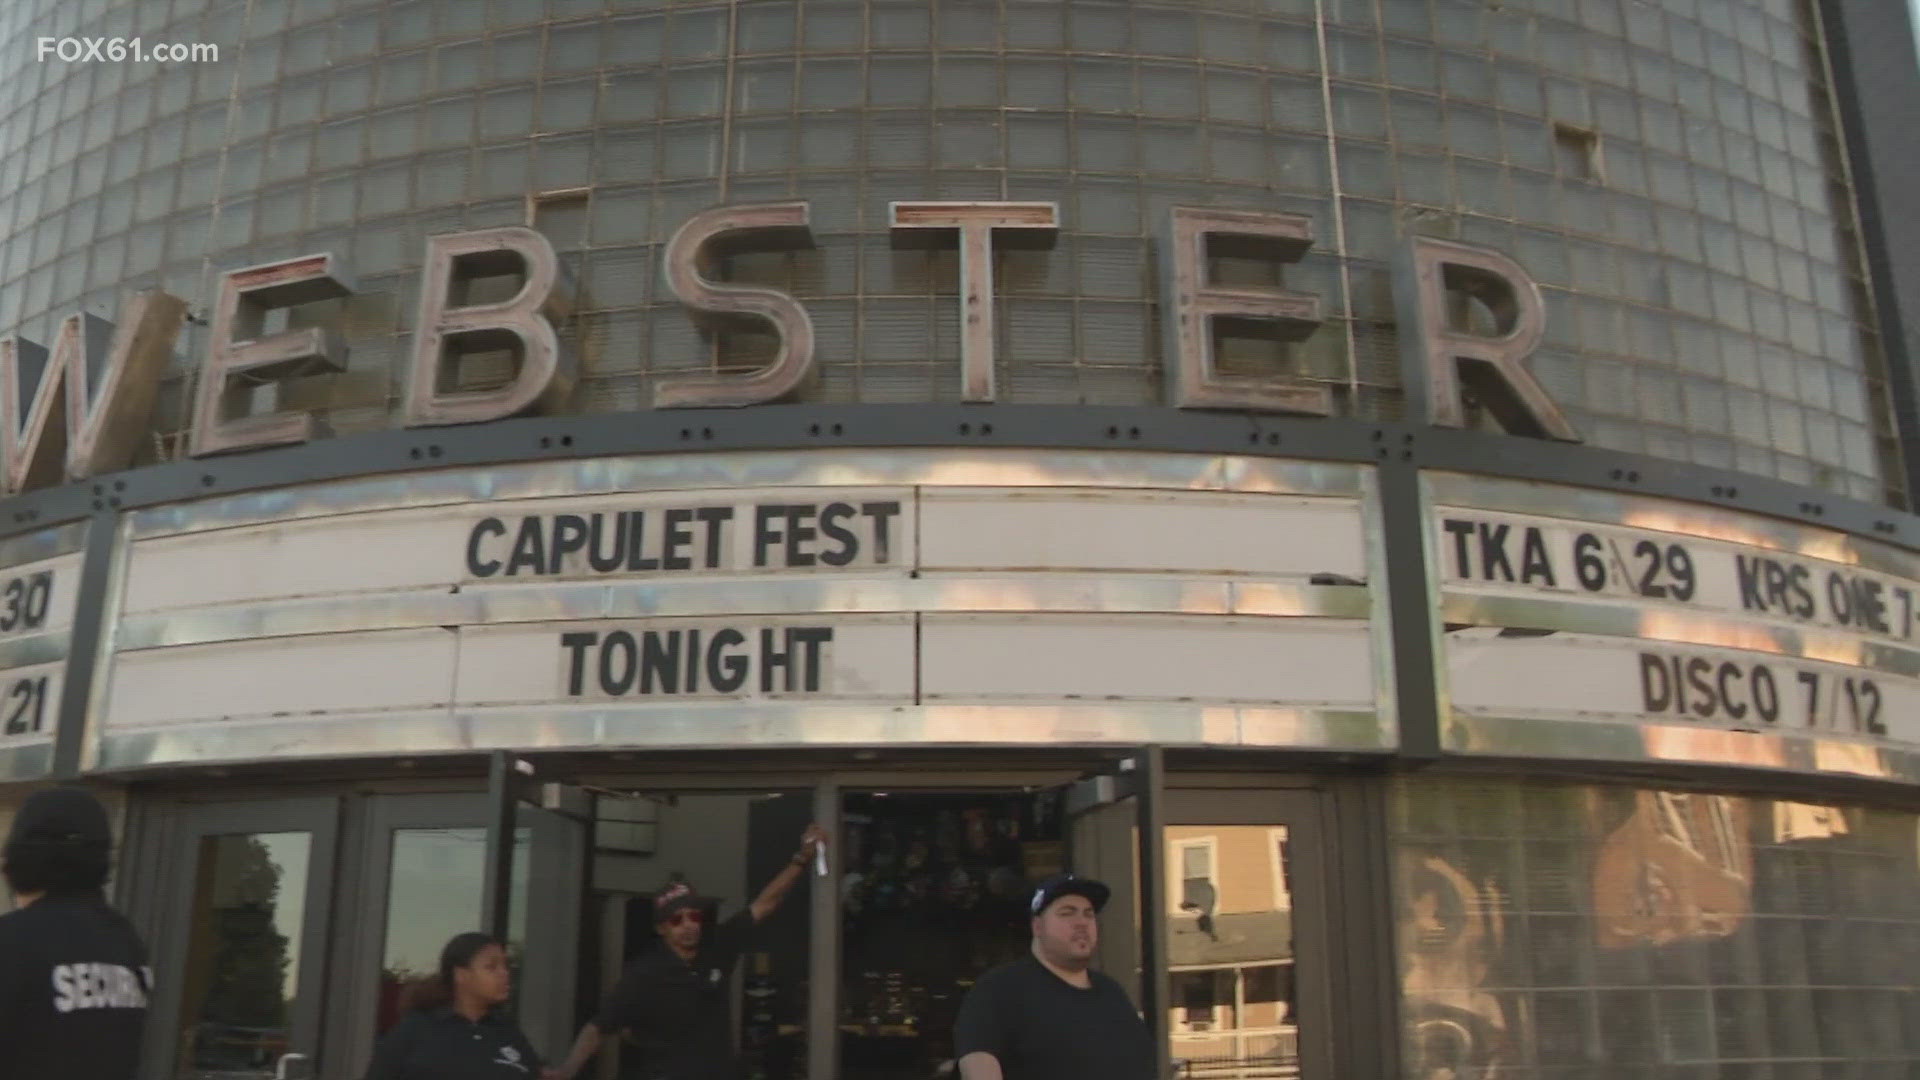 Capulet Fest was supposed to be held at Thomson Motor Speedway this weekend, but the venue changed at the last second to the Webster in Hartford.